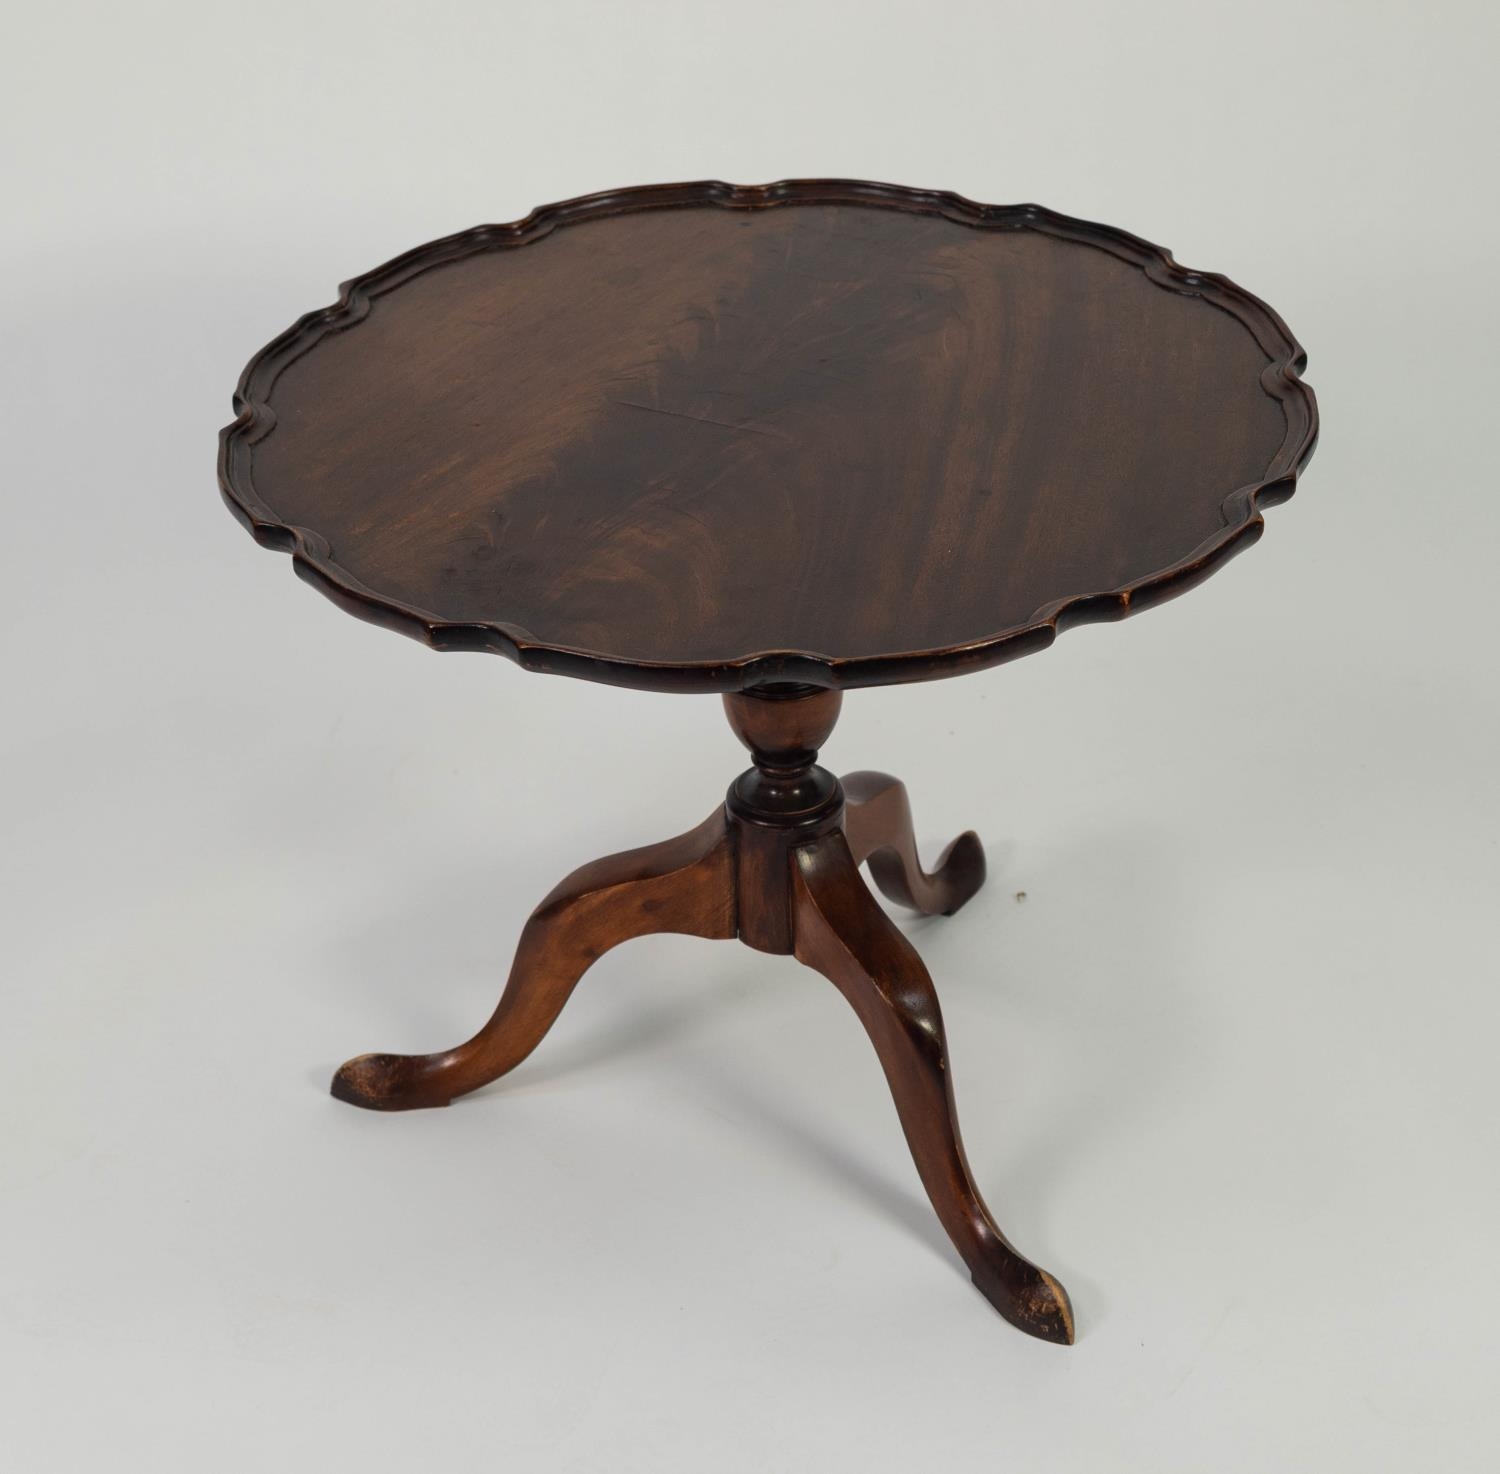 MODERN GEORGIAN STYLE FIGURE MAHOGANY SNAP TOP LOW OCCASIONAL TABLE, the flame cut top with